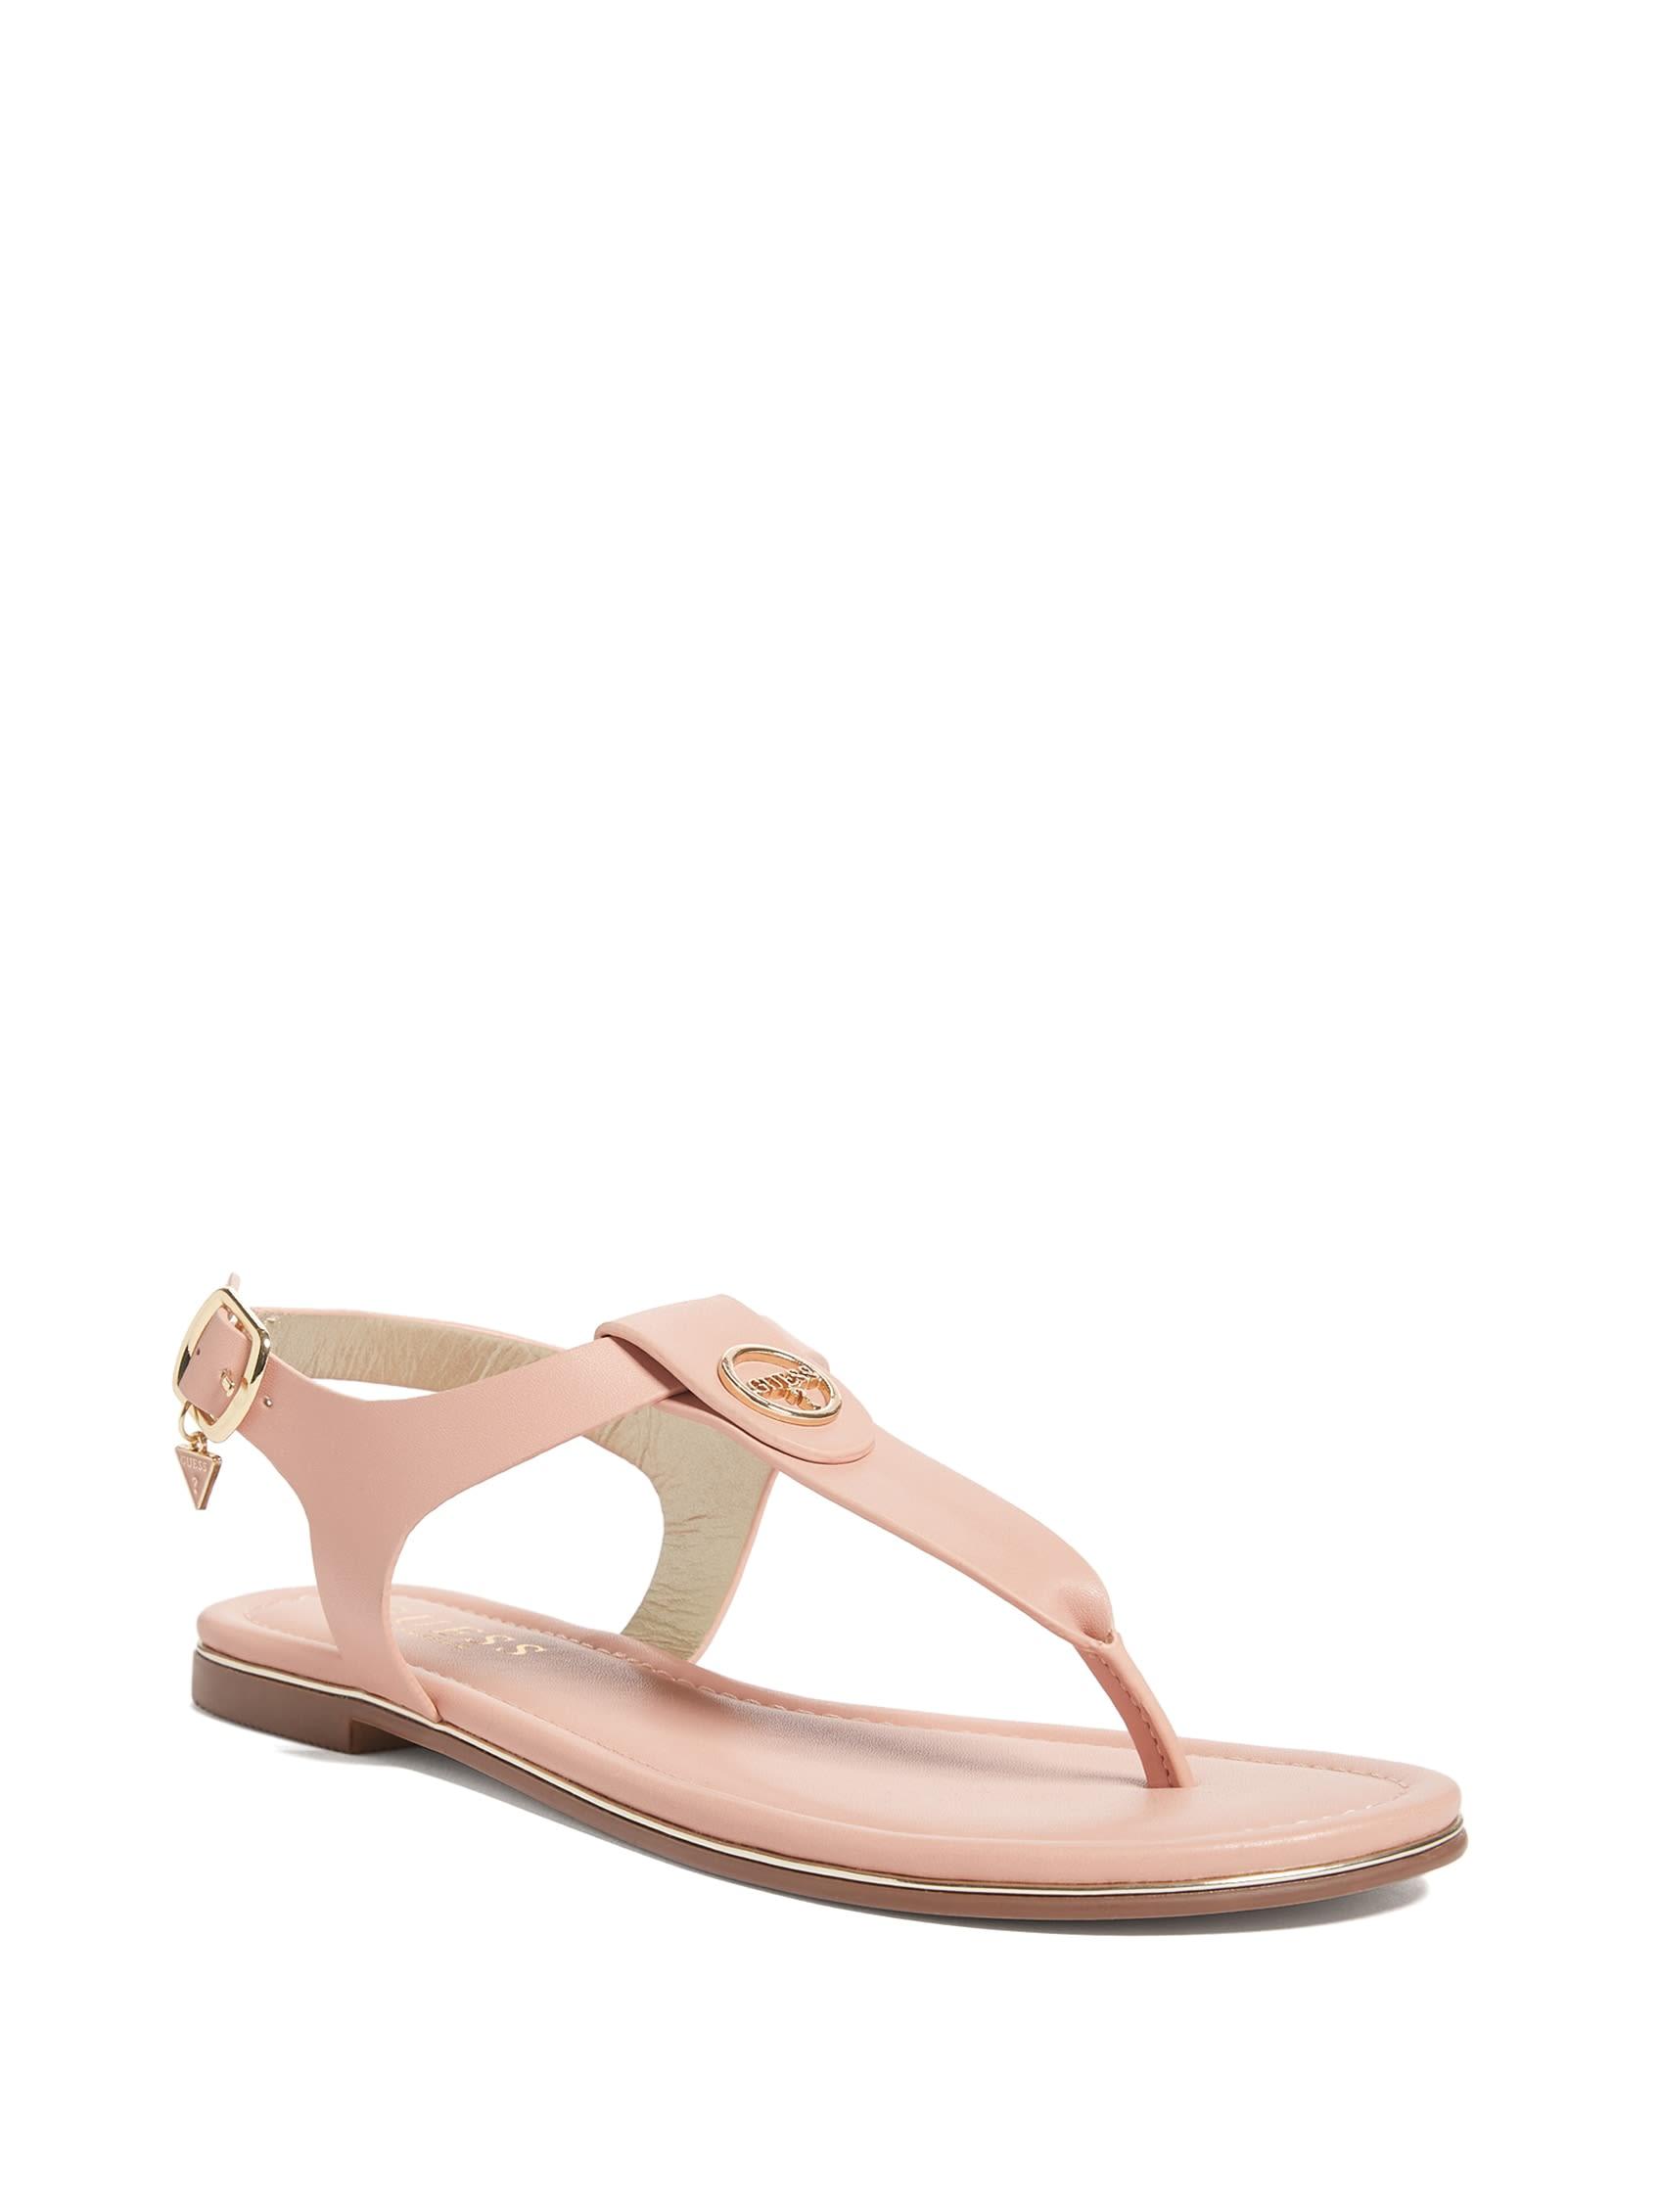 Guess Factory Caramel T-strap Sandals in Orange | Lyst